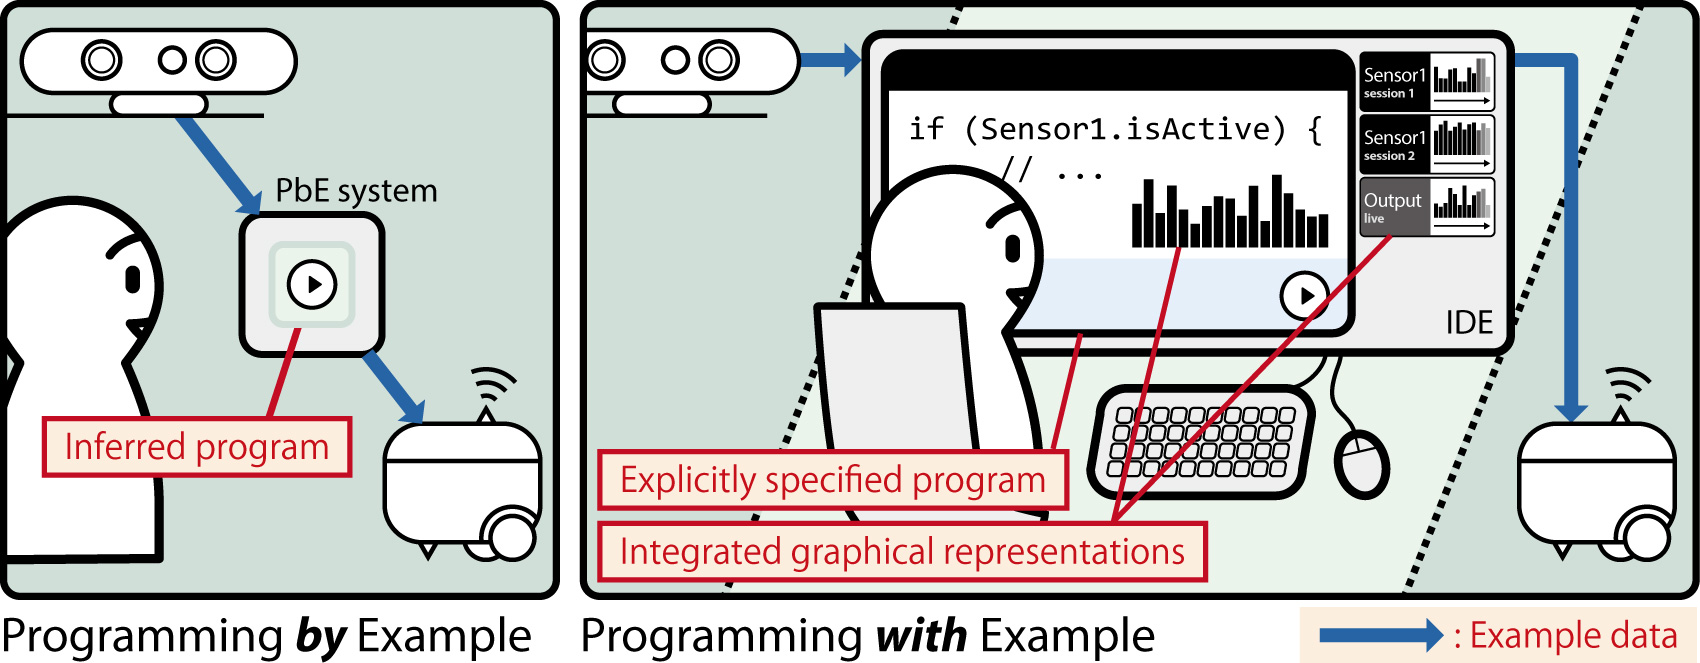 (Programming by Example vs Programming with Examples)